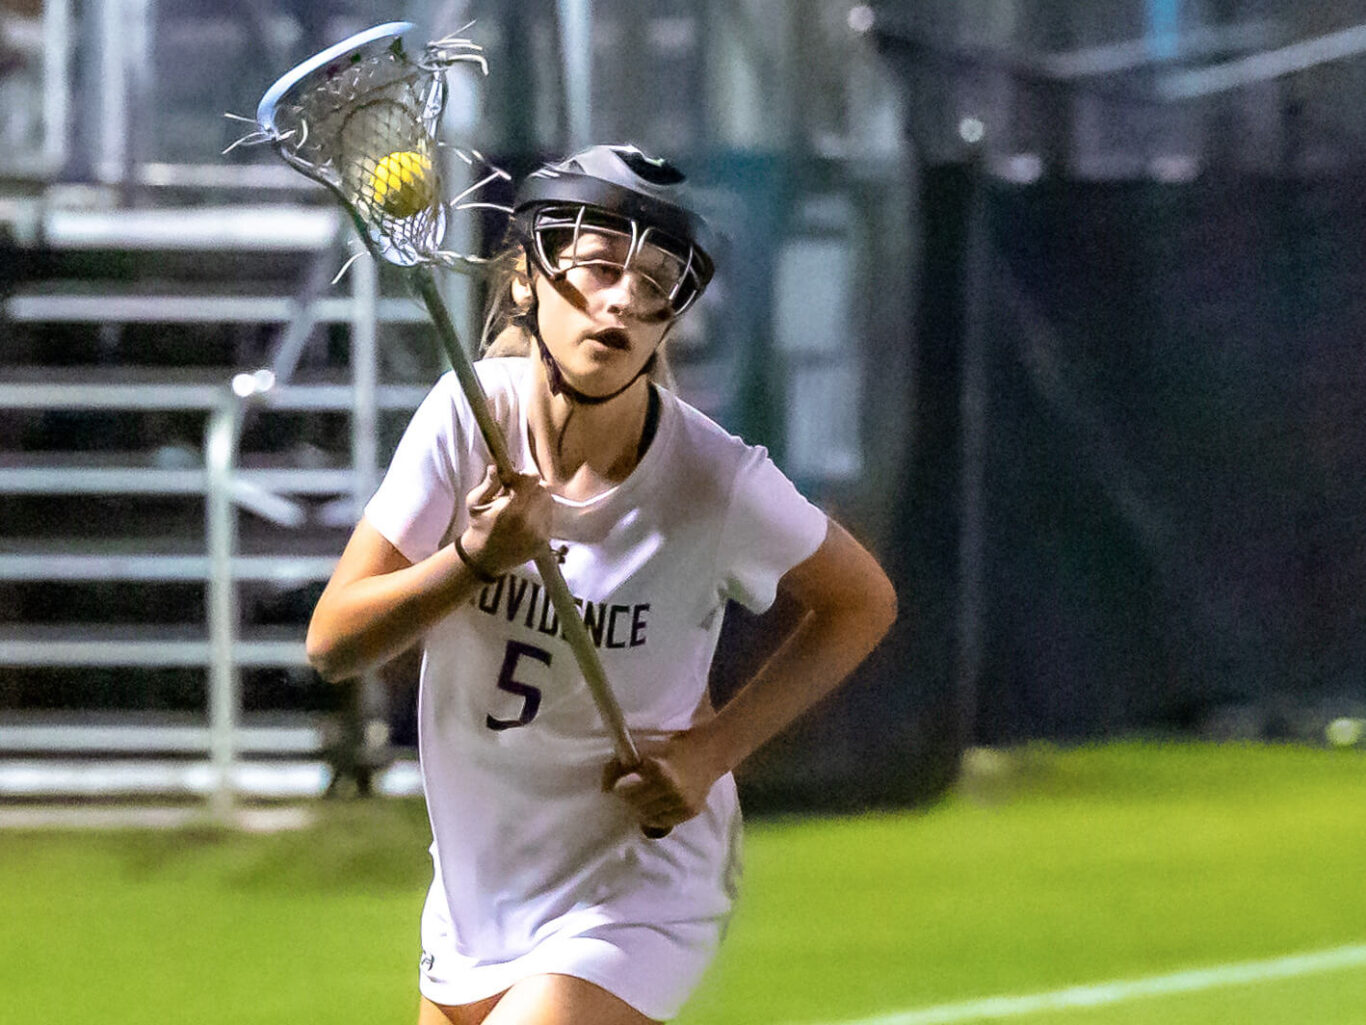 A female lacrosse player is running with a ball during a girls' lacrosse match.